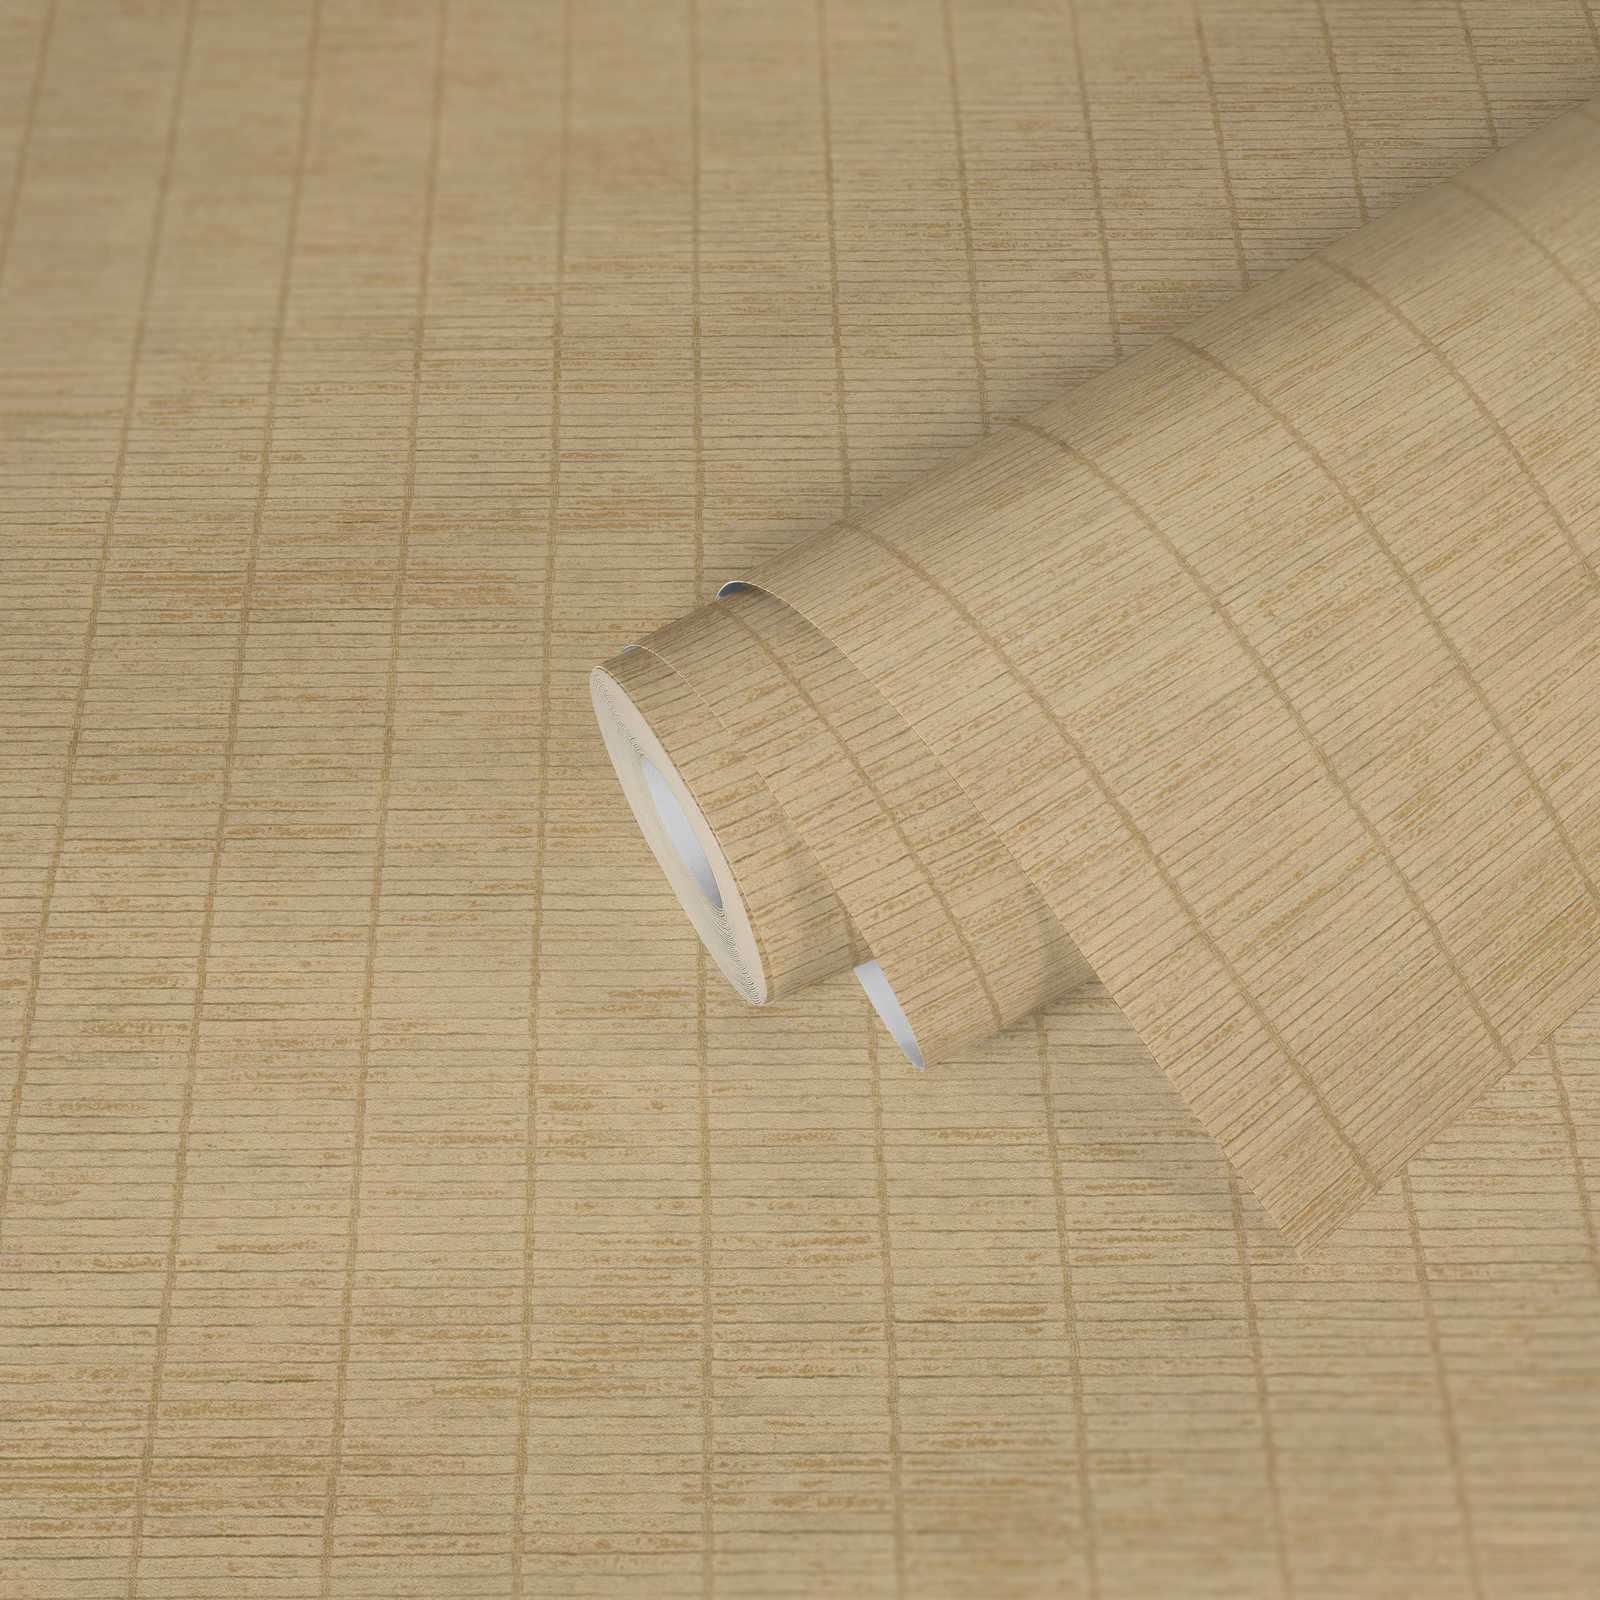             Non-woven wallpaper in the look of an Asian straw mat - beige
        